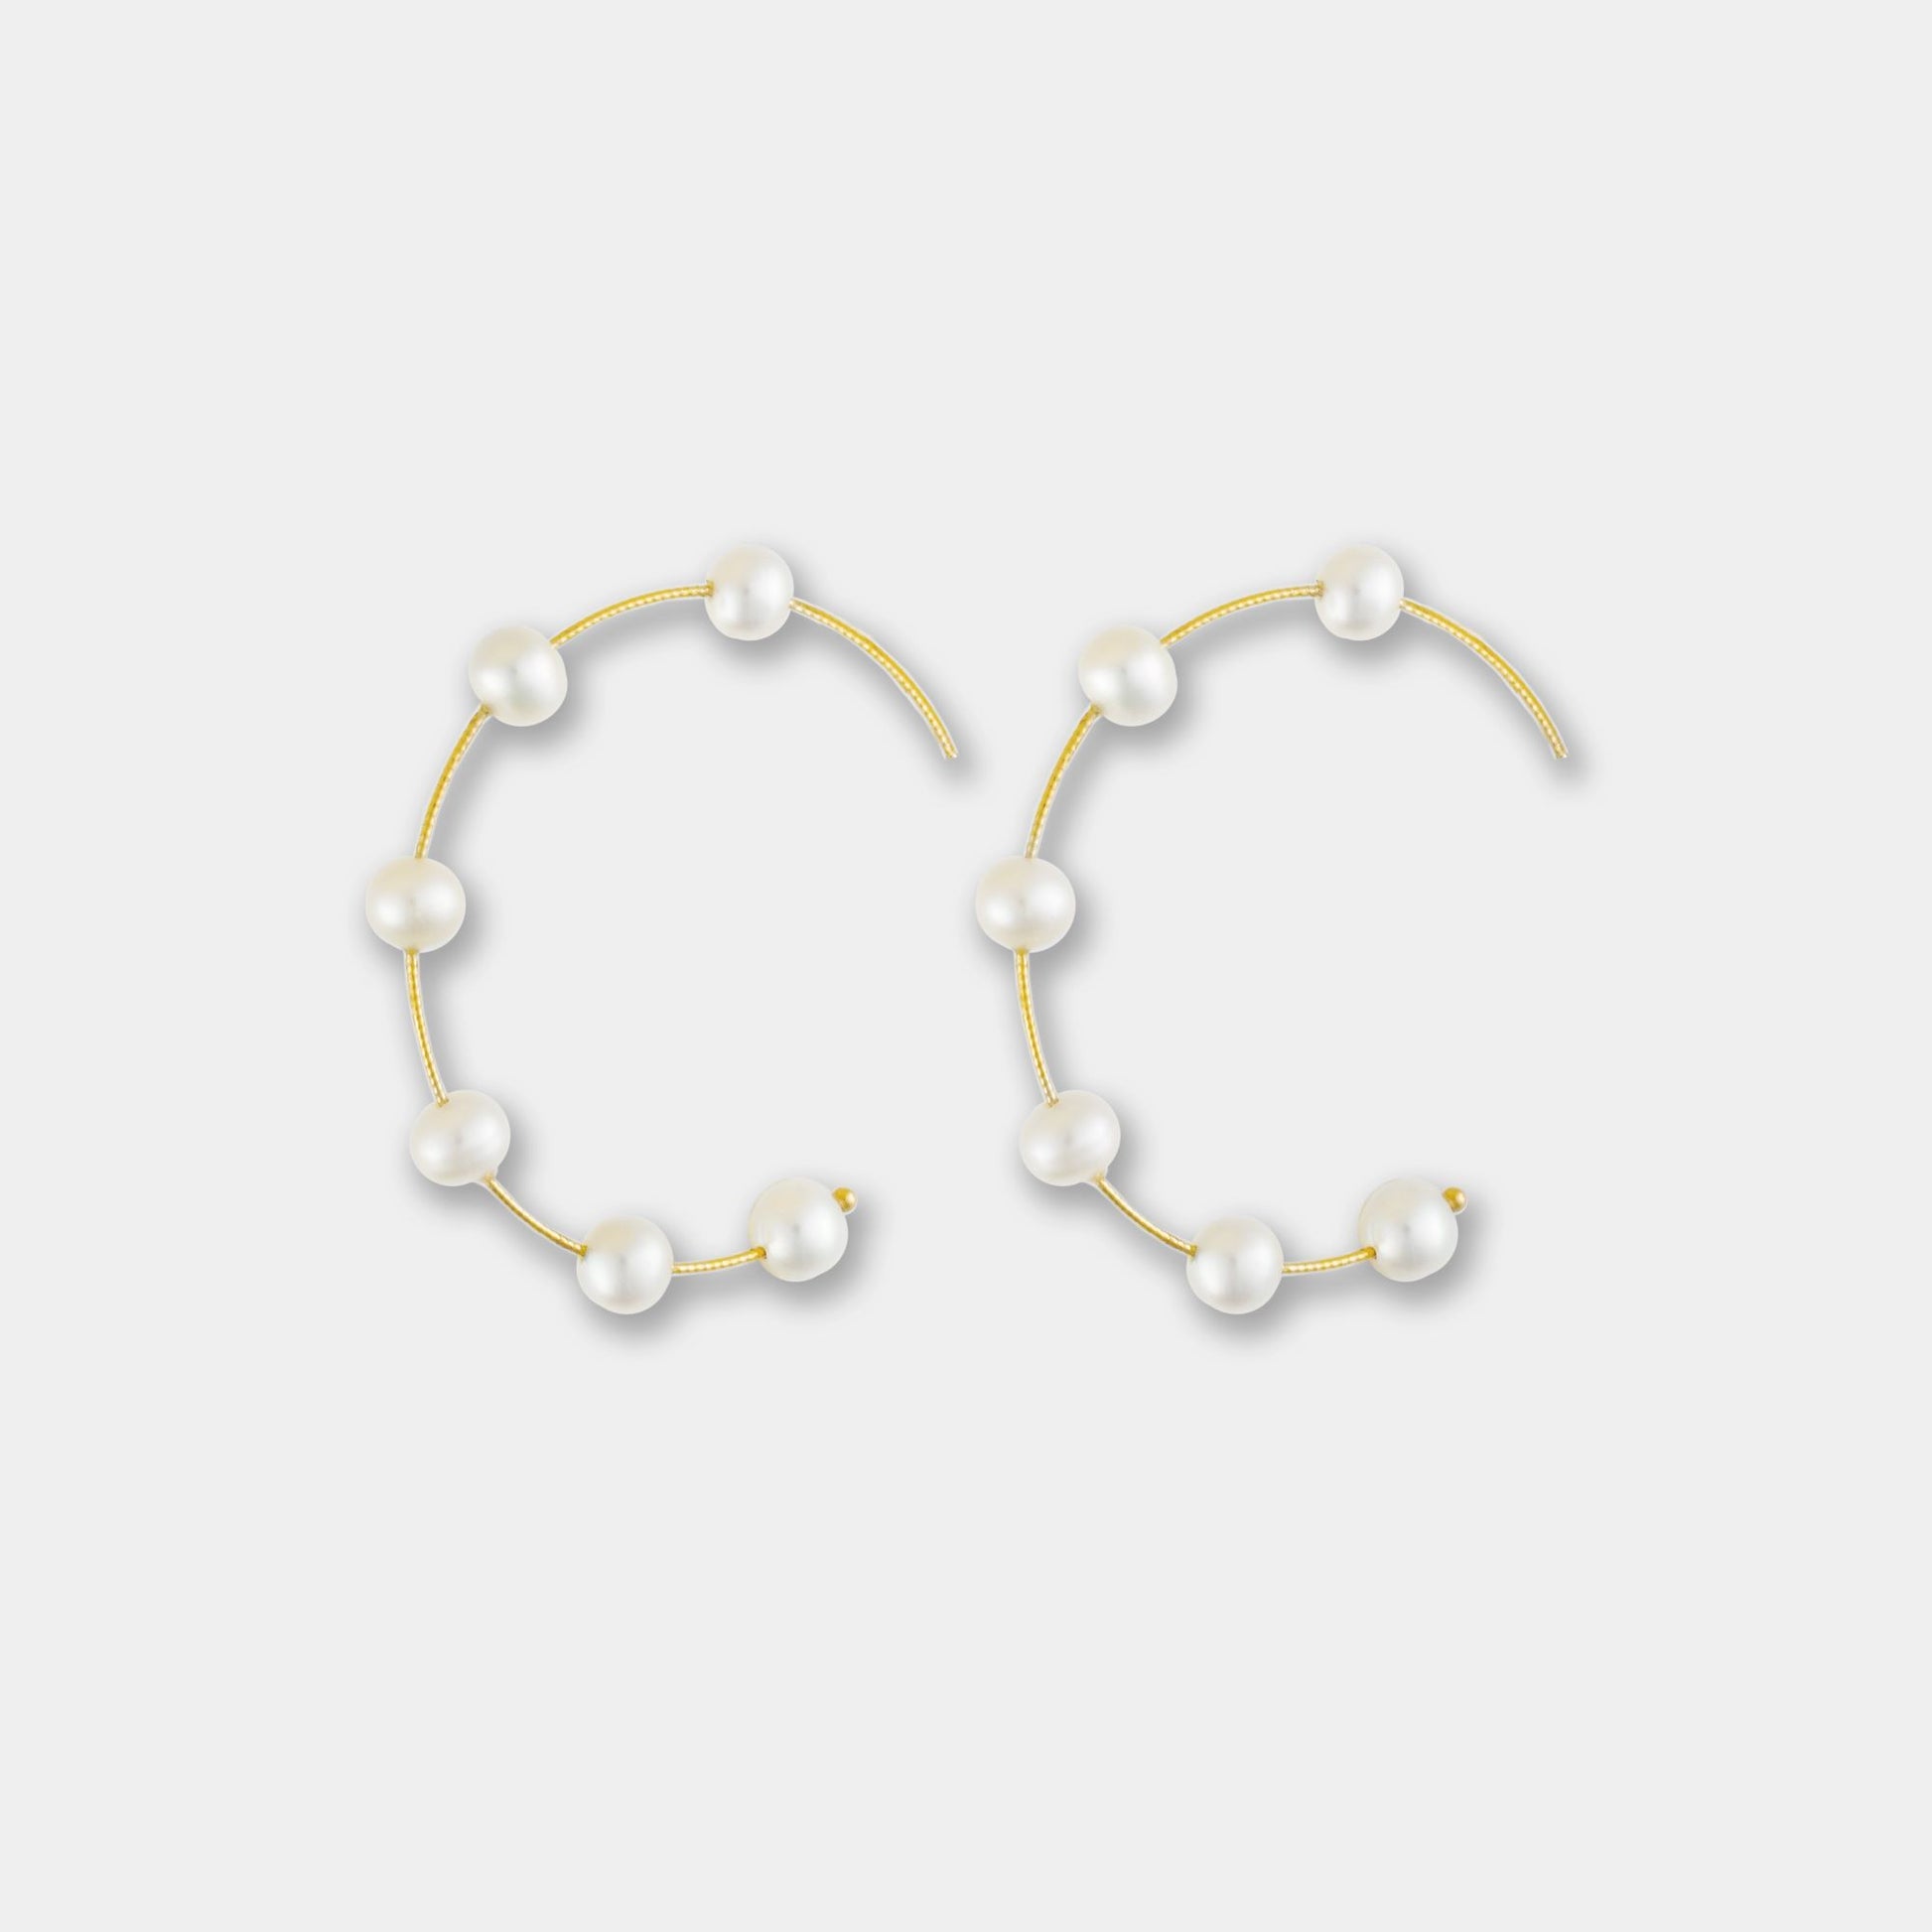 Embrace sophistication with these captivating gold hoop earrings embellished with delicate white pearls. A must-have for any jewelry collection.